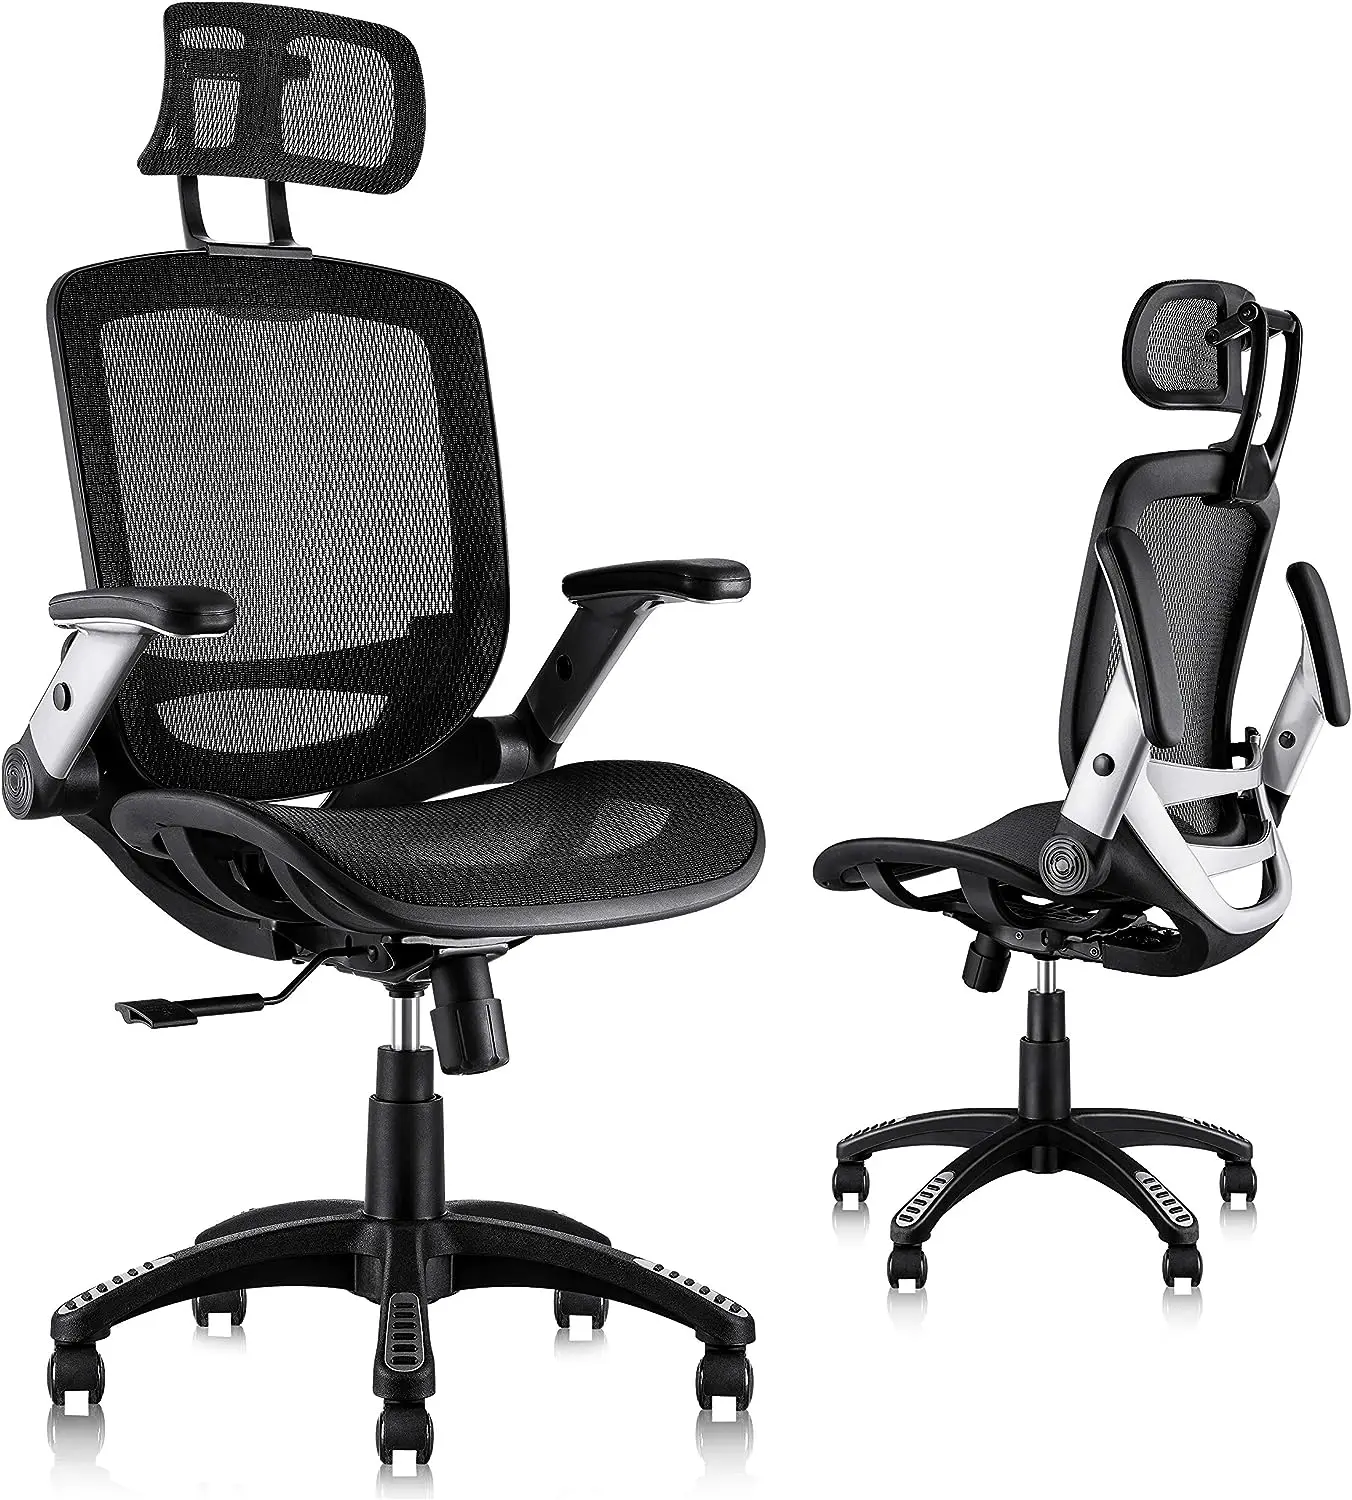 

Ergonomic Mesh Office Chair High Back Desk Chair Home Computer Chair Gaming Task Chair,Lumbar Support and PU Wheels,Black